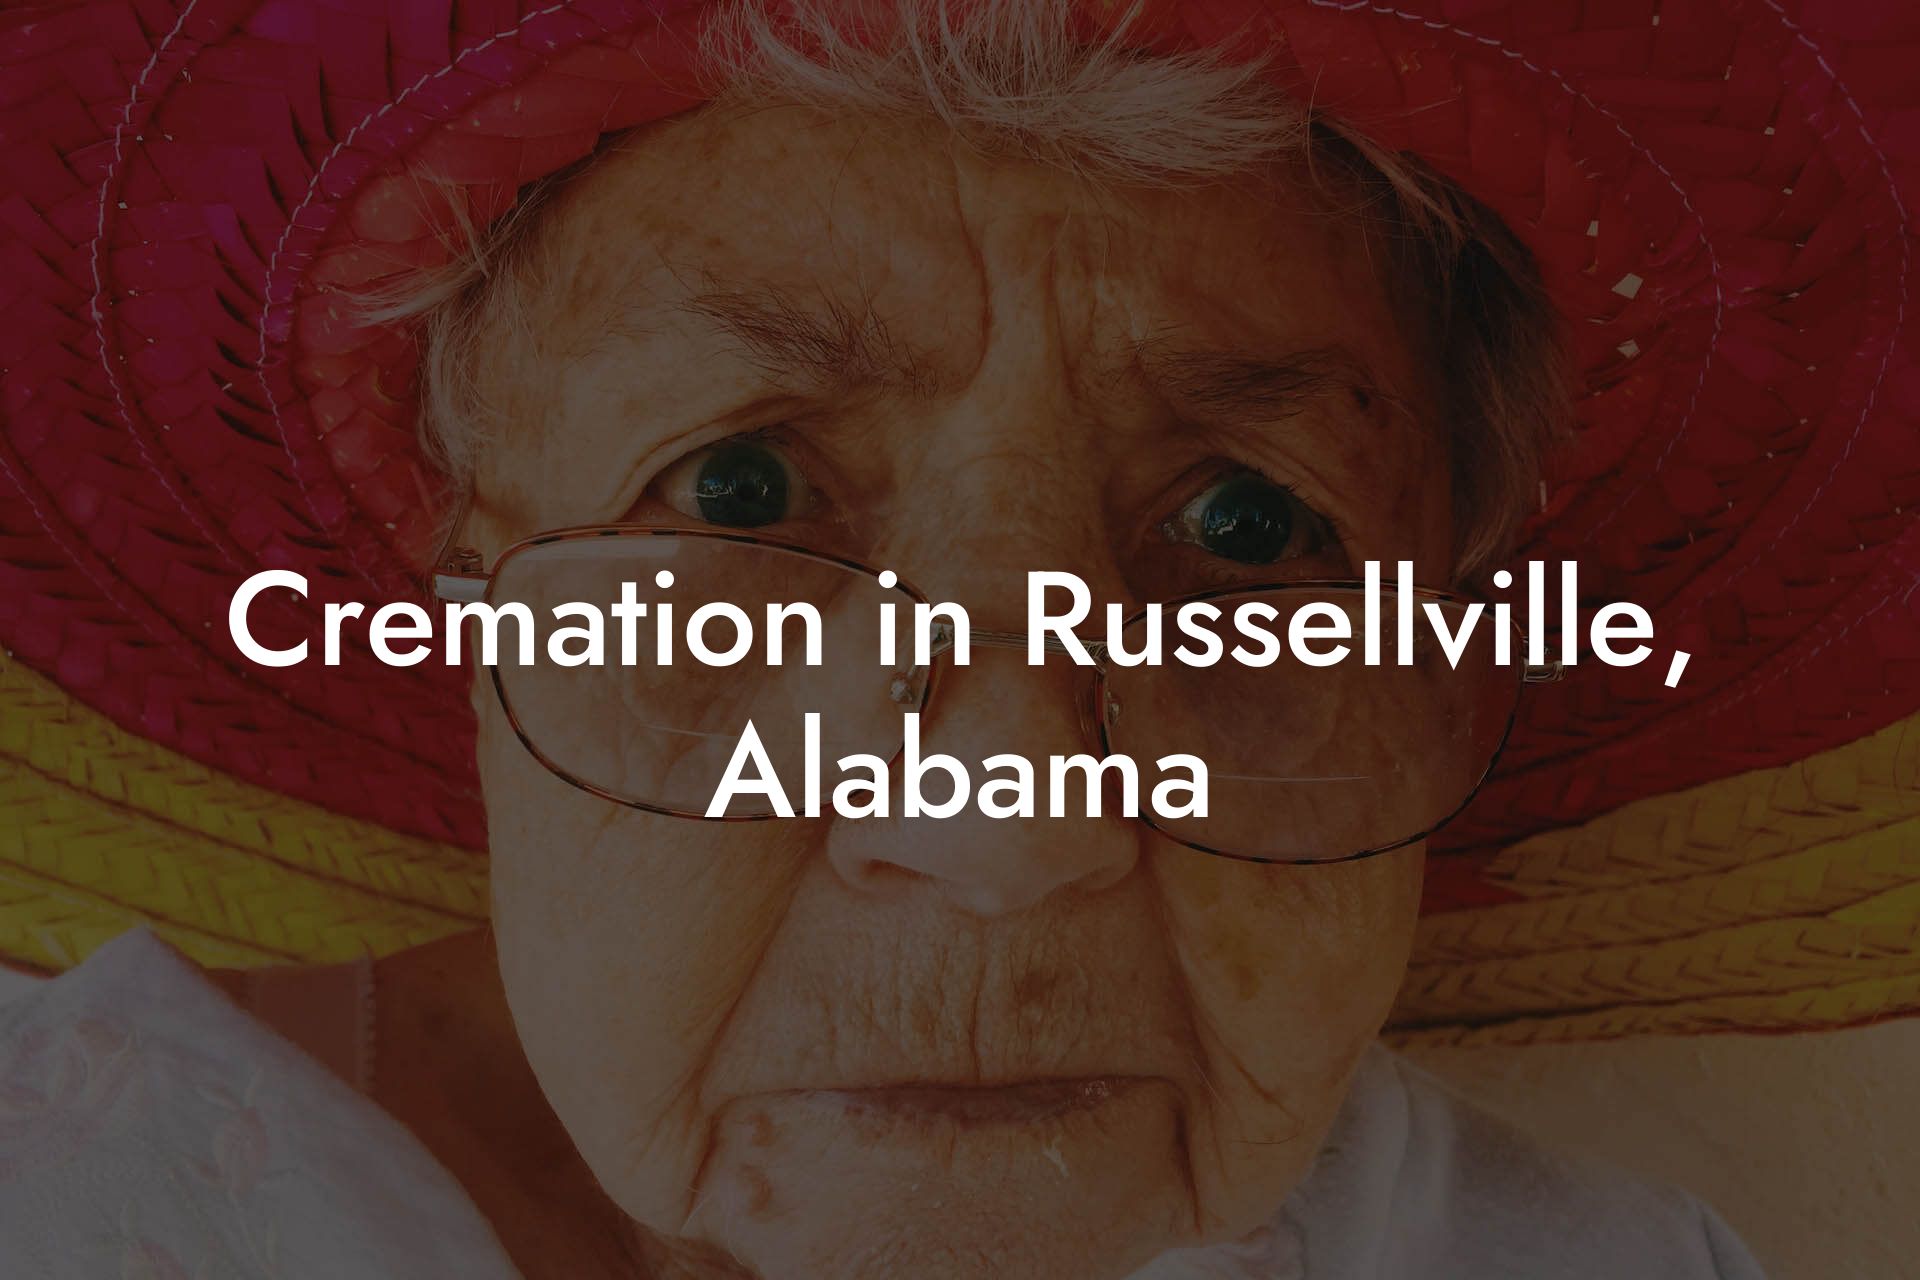 Cremation in Russellville, Alabama